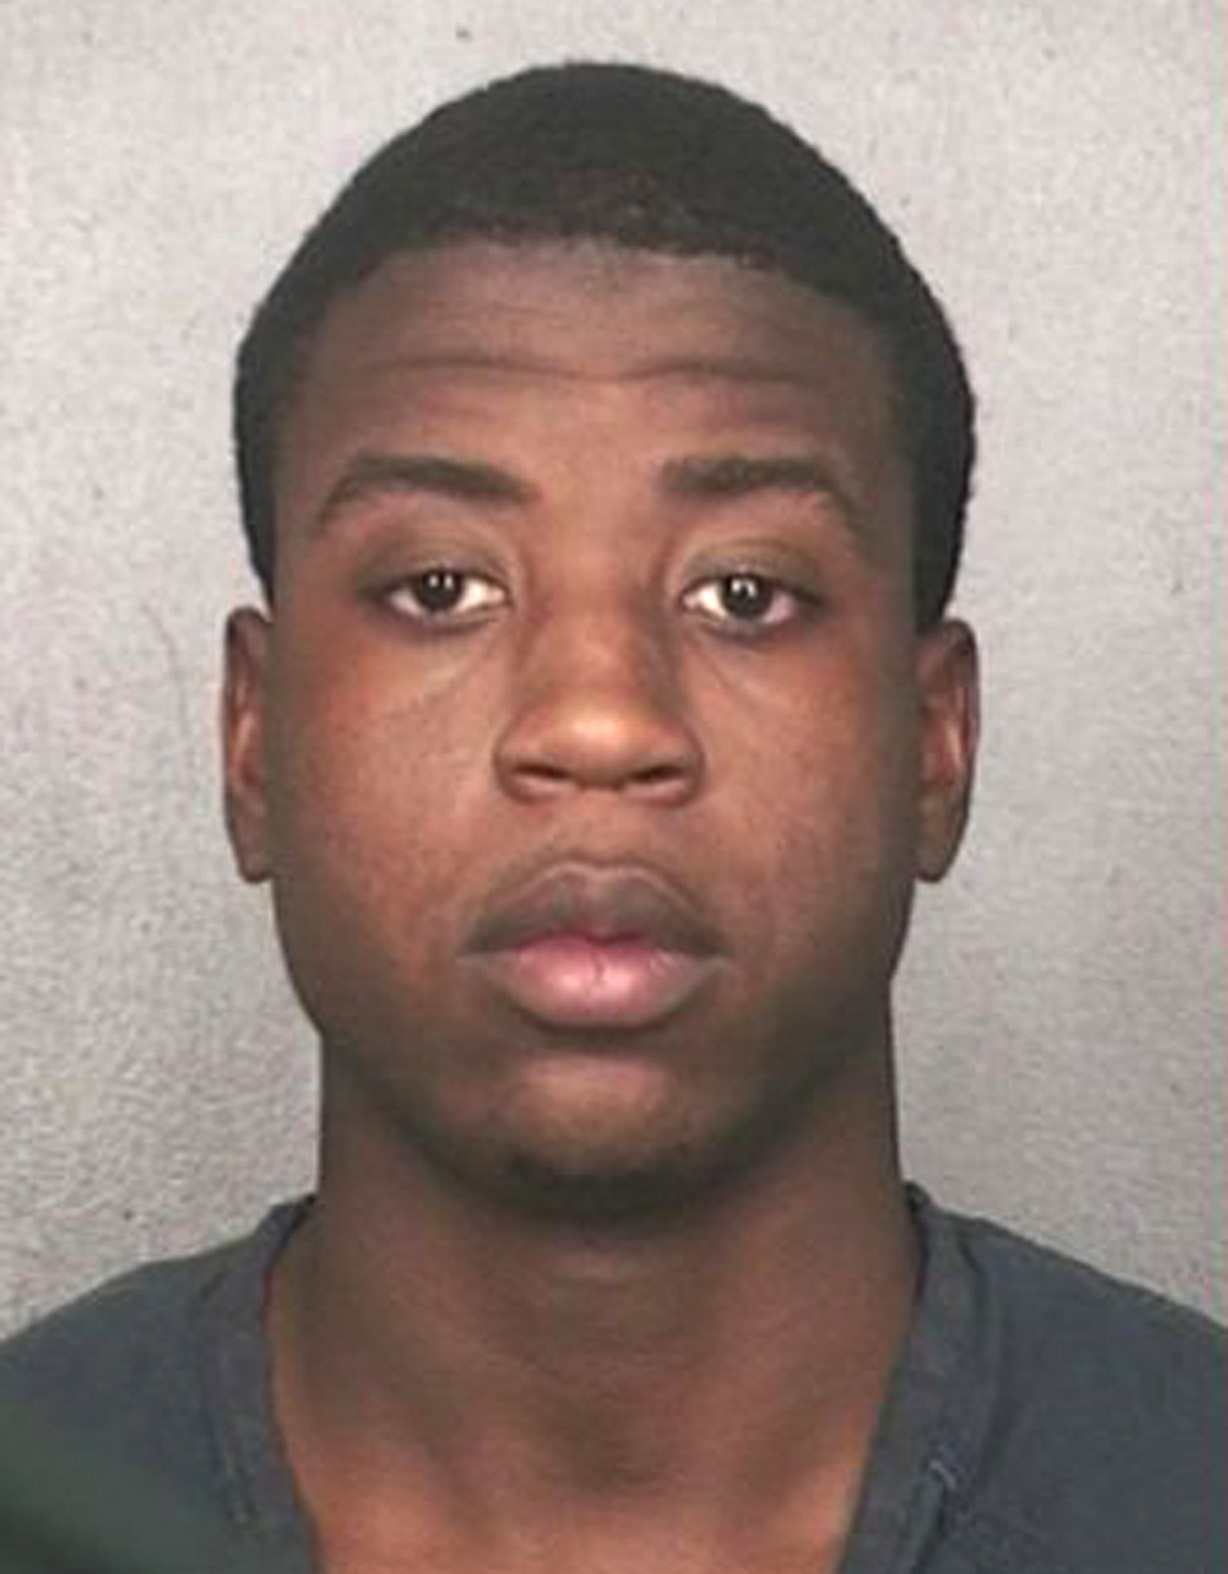 Fort Lauderdale, FL - Sheriff: Escaped Florida Murder Suspect Armed, Has Help